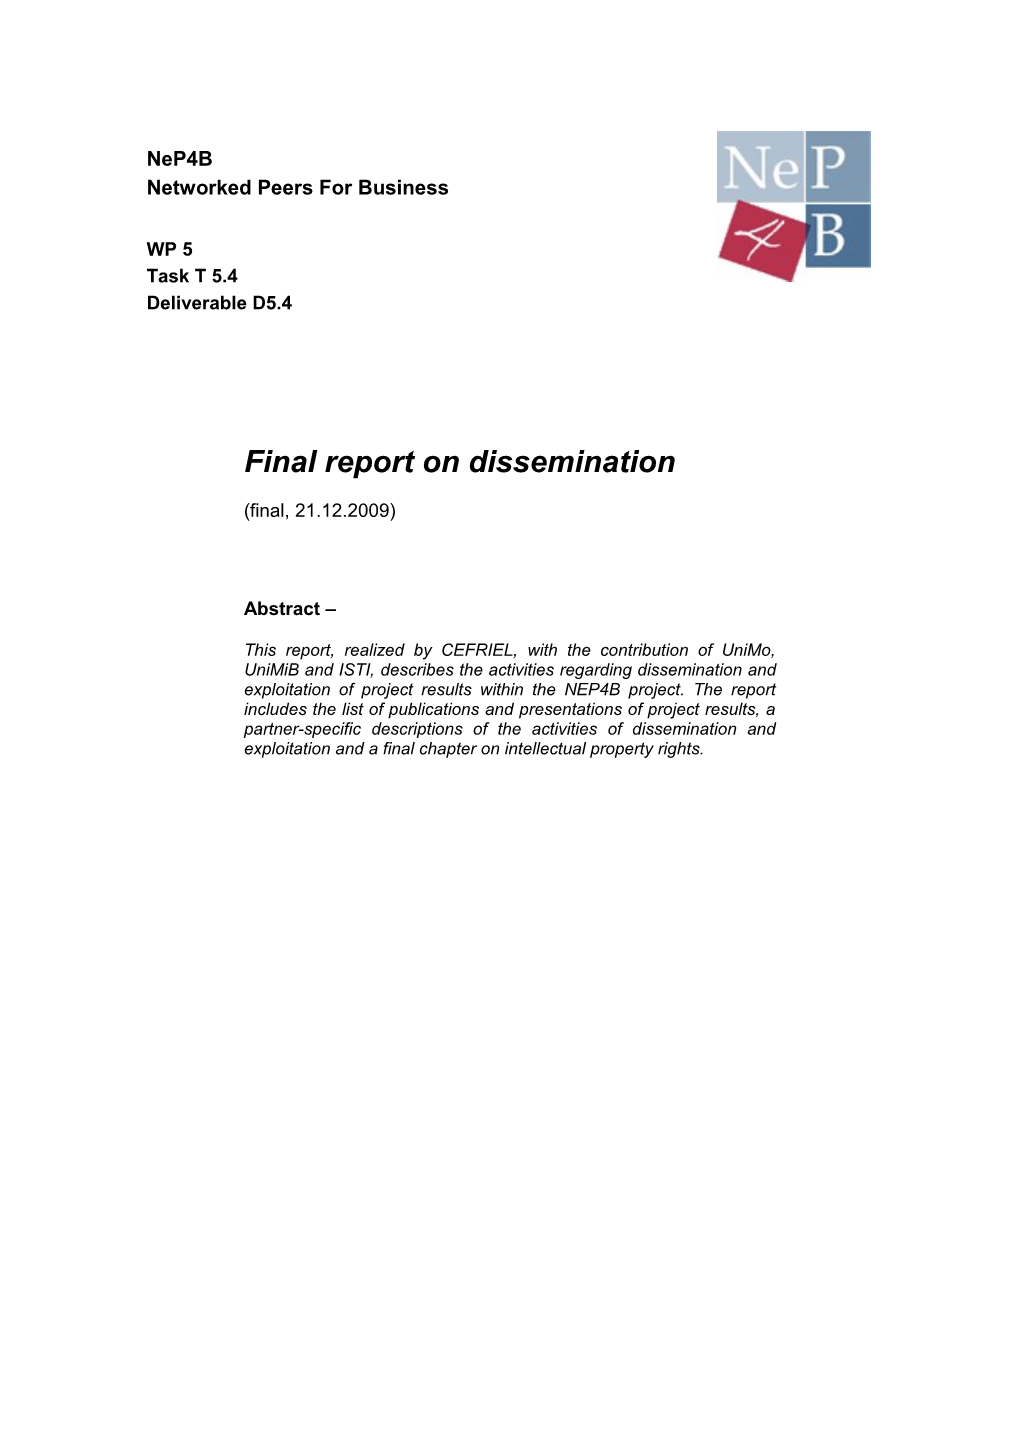 Final Report on Dissemination